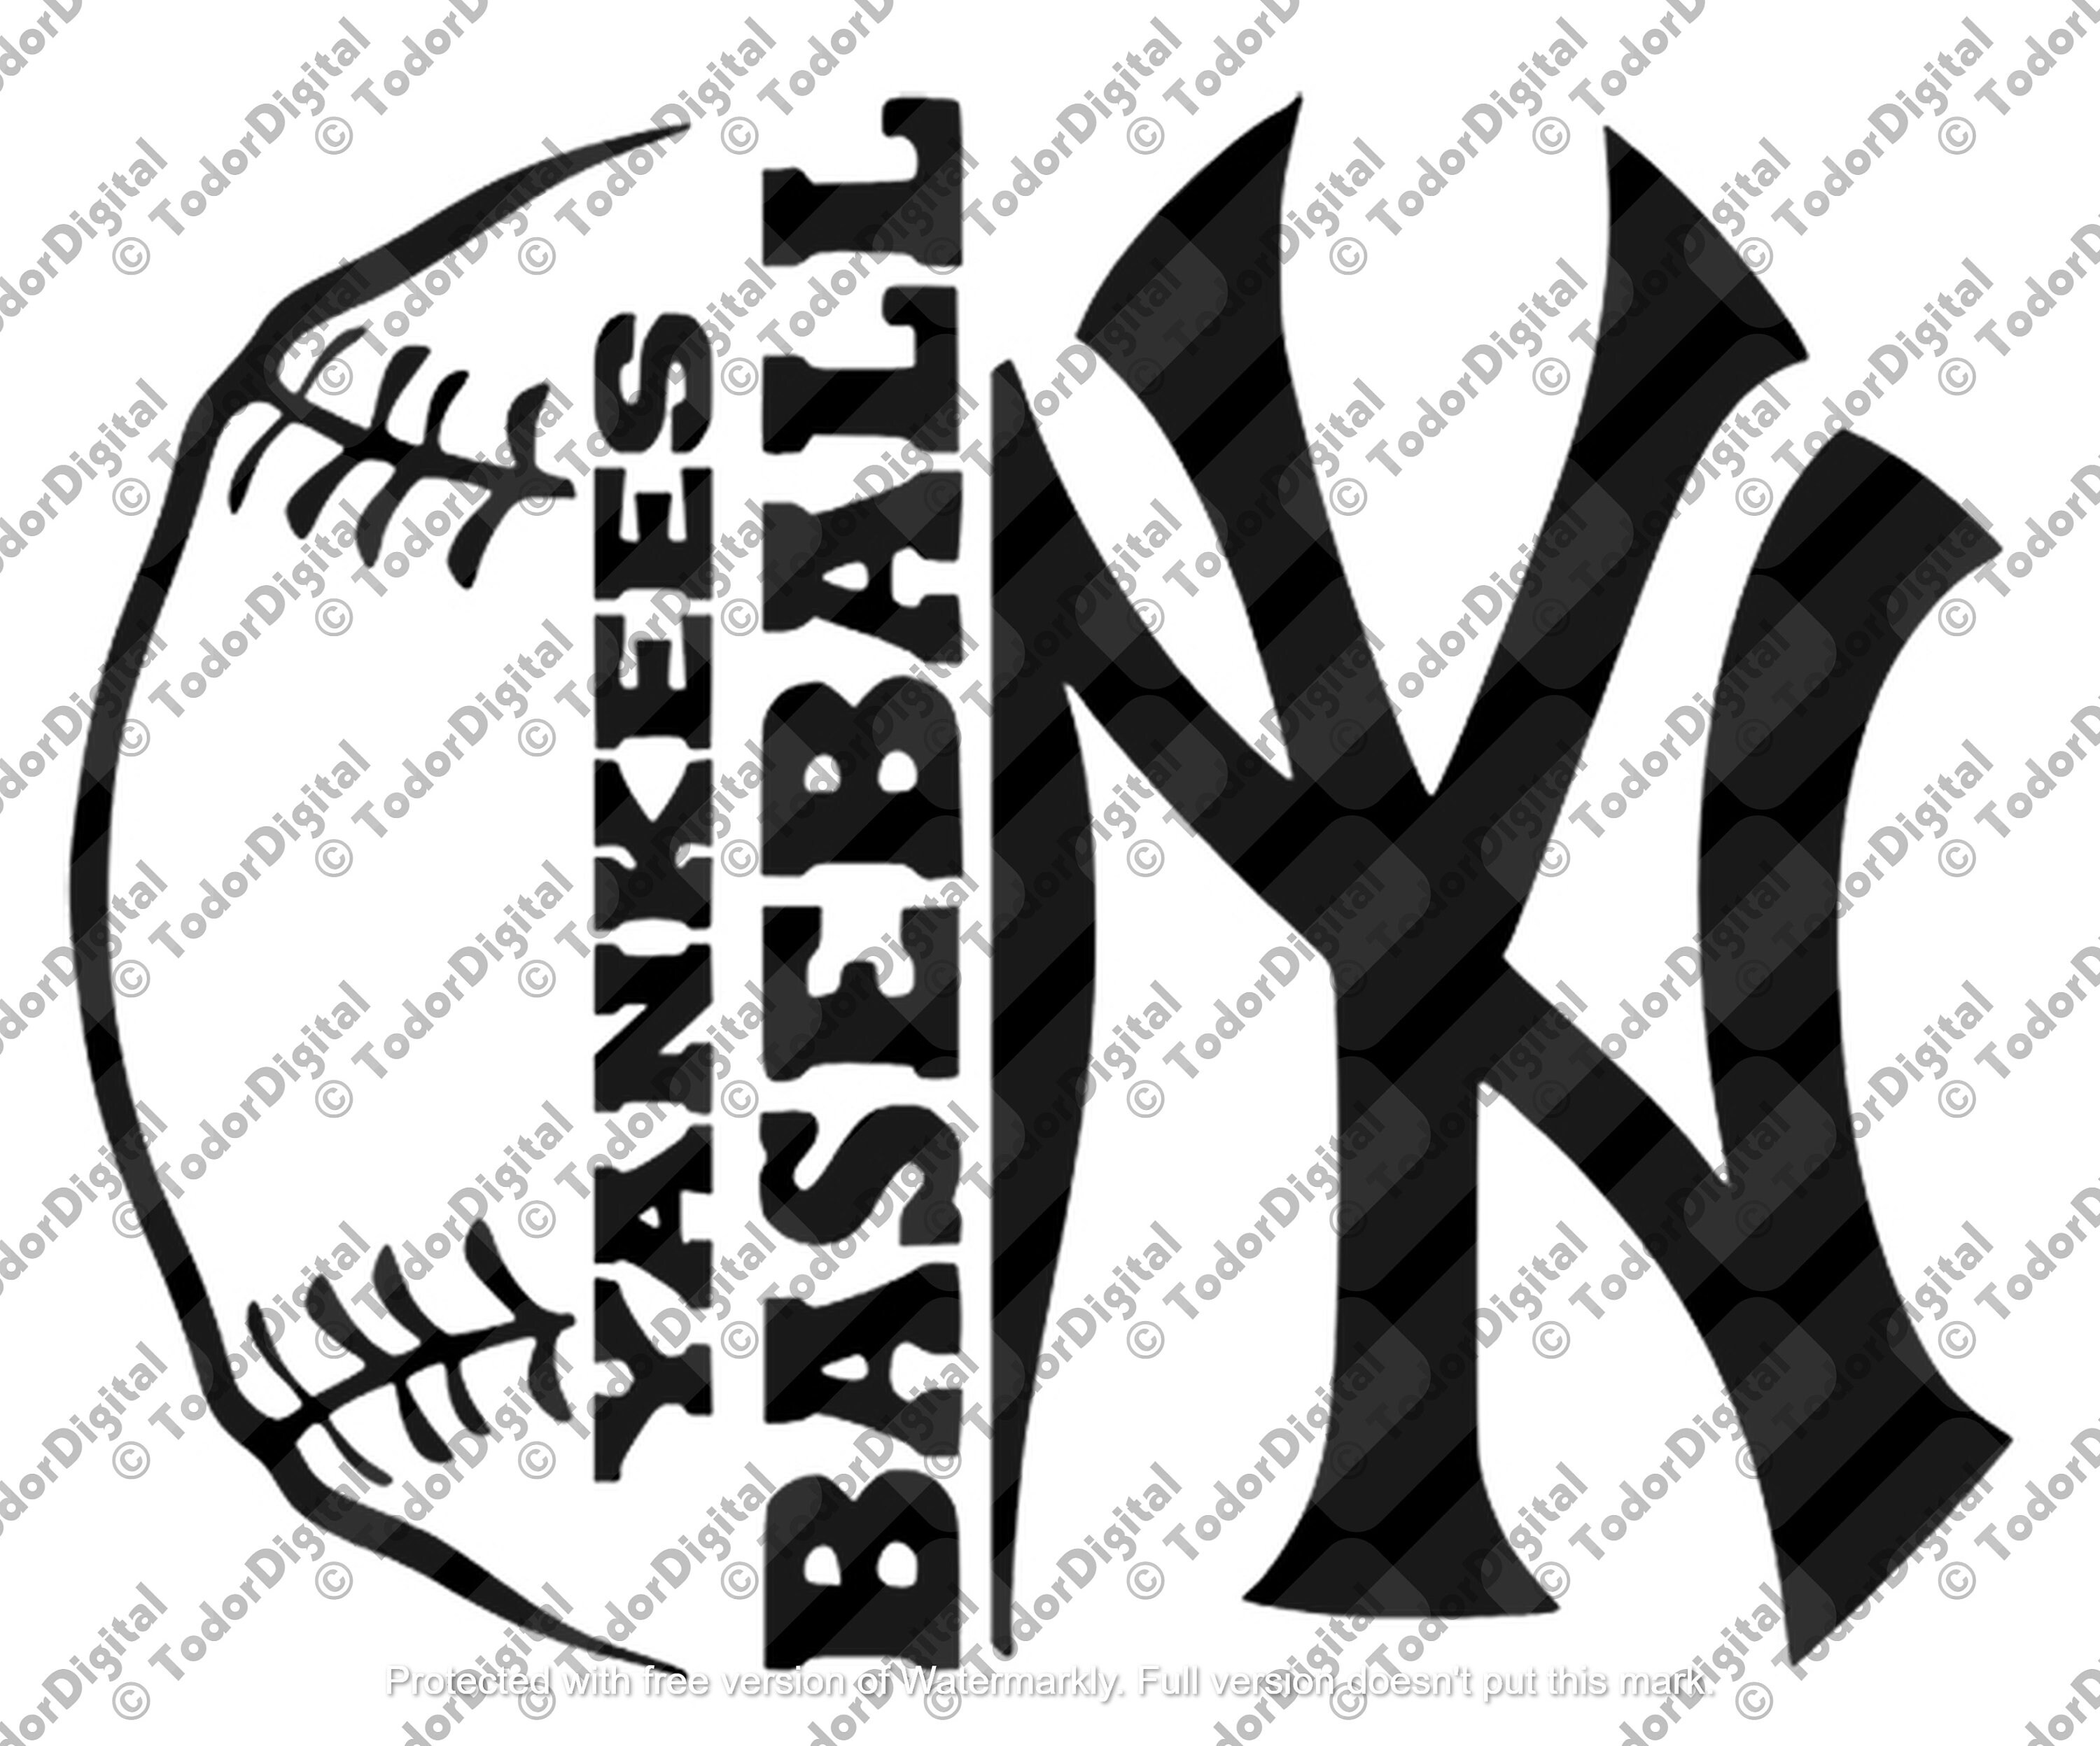 Printable DIY Mickey Mouse New York Yankees baseball Iron on transfer  digital image clipart INSTANT DOWNLOAD